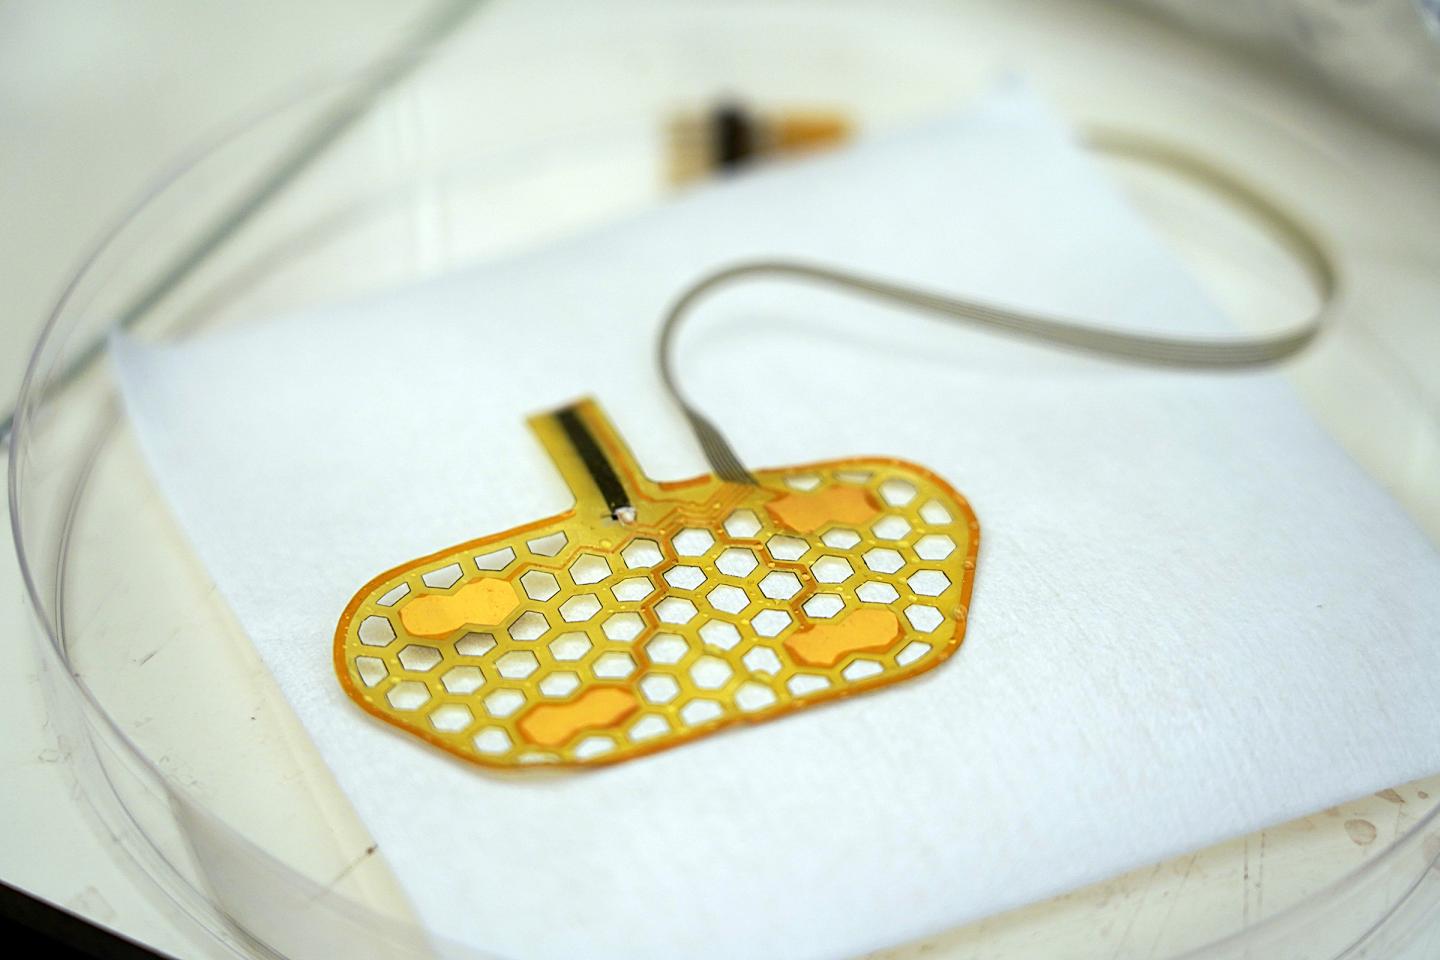 Purdue researchers created wearable technology to help people with swallowing disorders. (Source: Jared Pike/Purdue University)